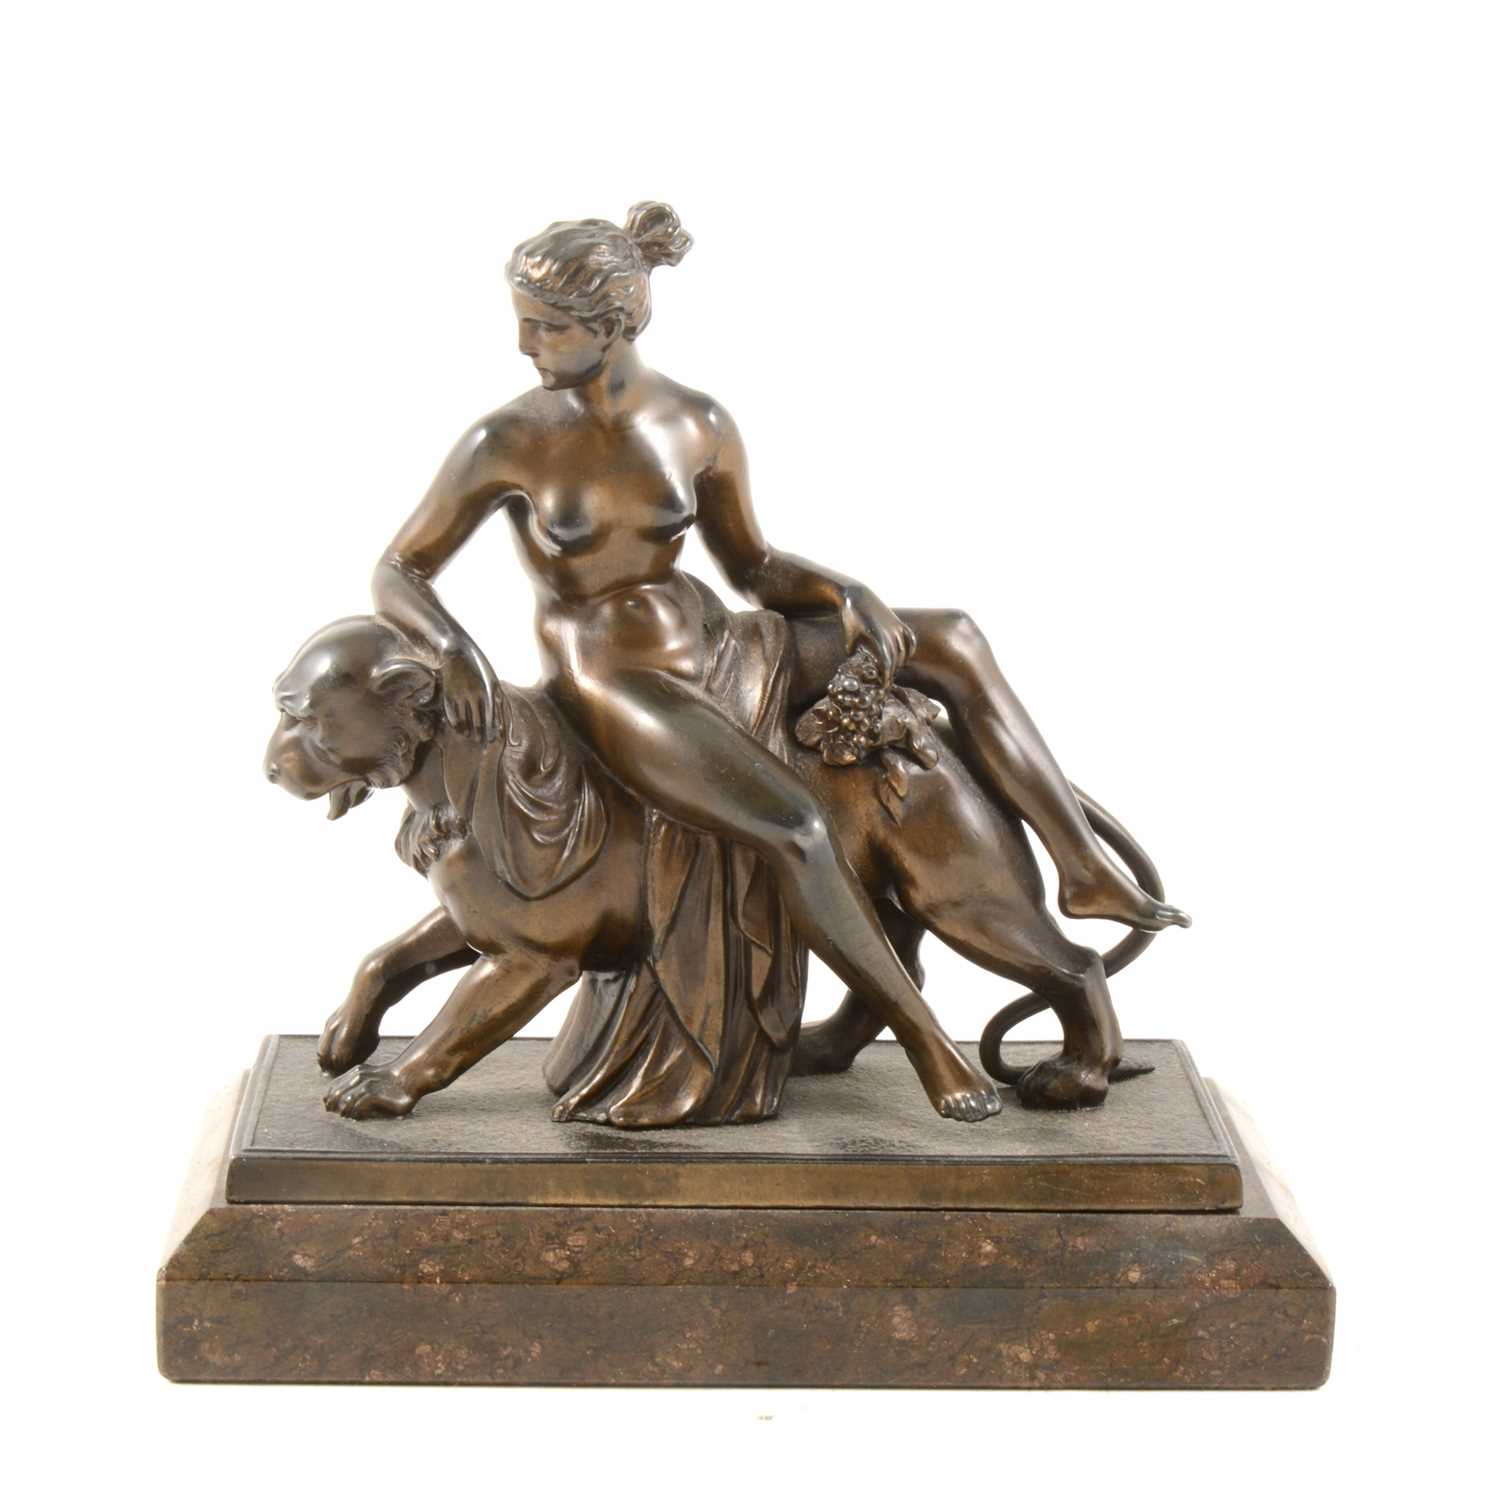 Lot 132 - A fine 19th Century bronzed group of a maiden resting on the back of a lion.